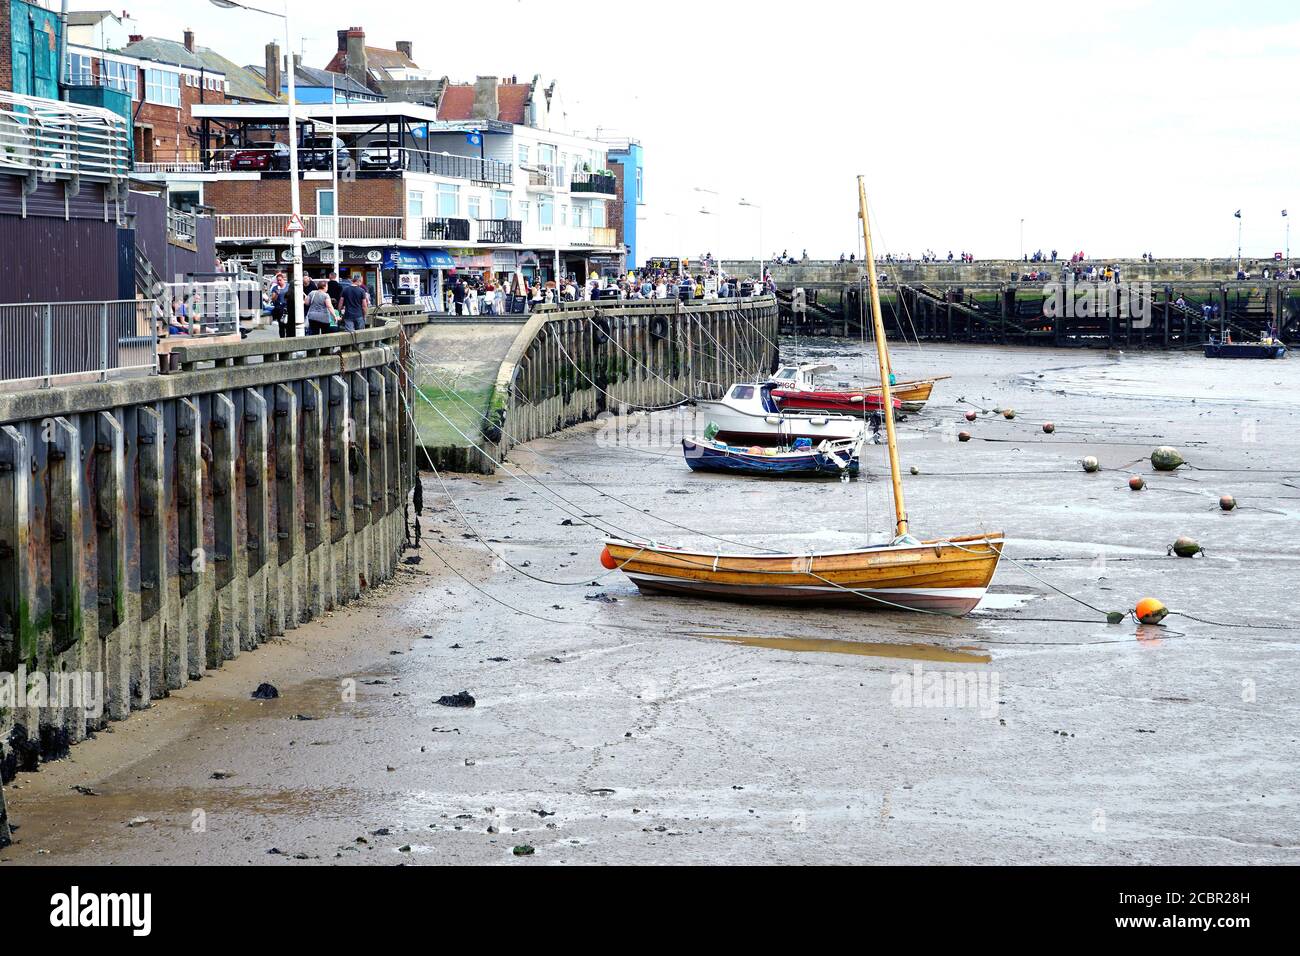 Bridligton, Yorkshire, UK. August 05, 2020. Holidaymakers throng the harbor quay at low tide with boats moored on sand at Bridlington in Yorkshire, UK Stock Photo